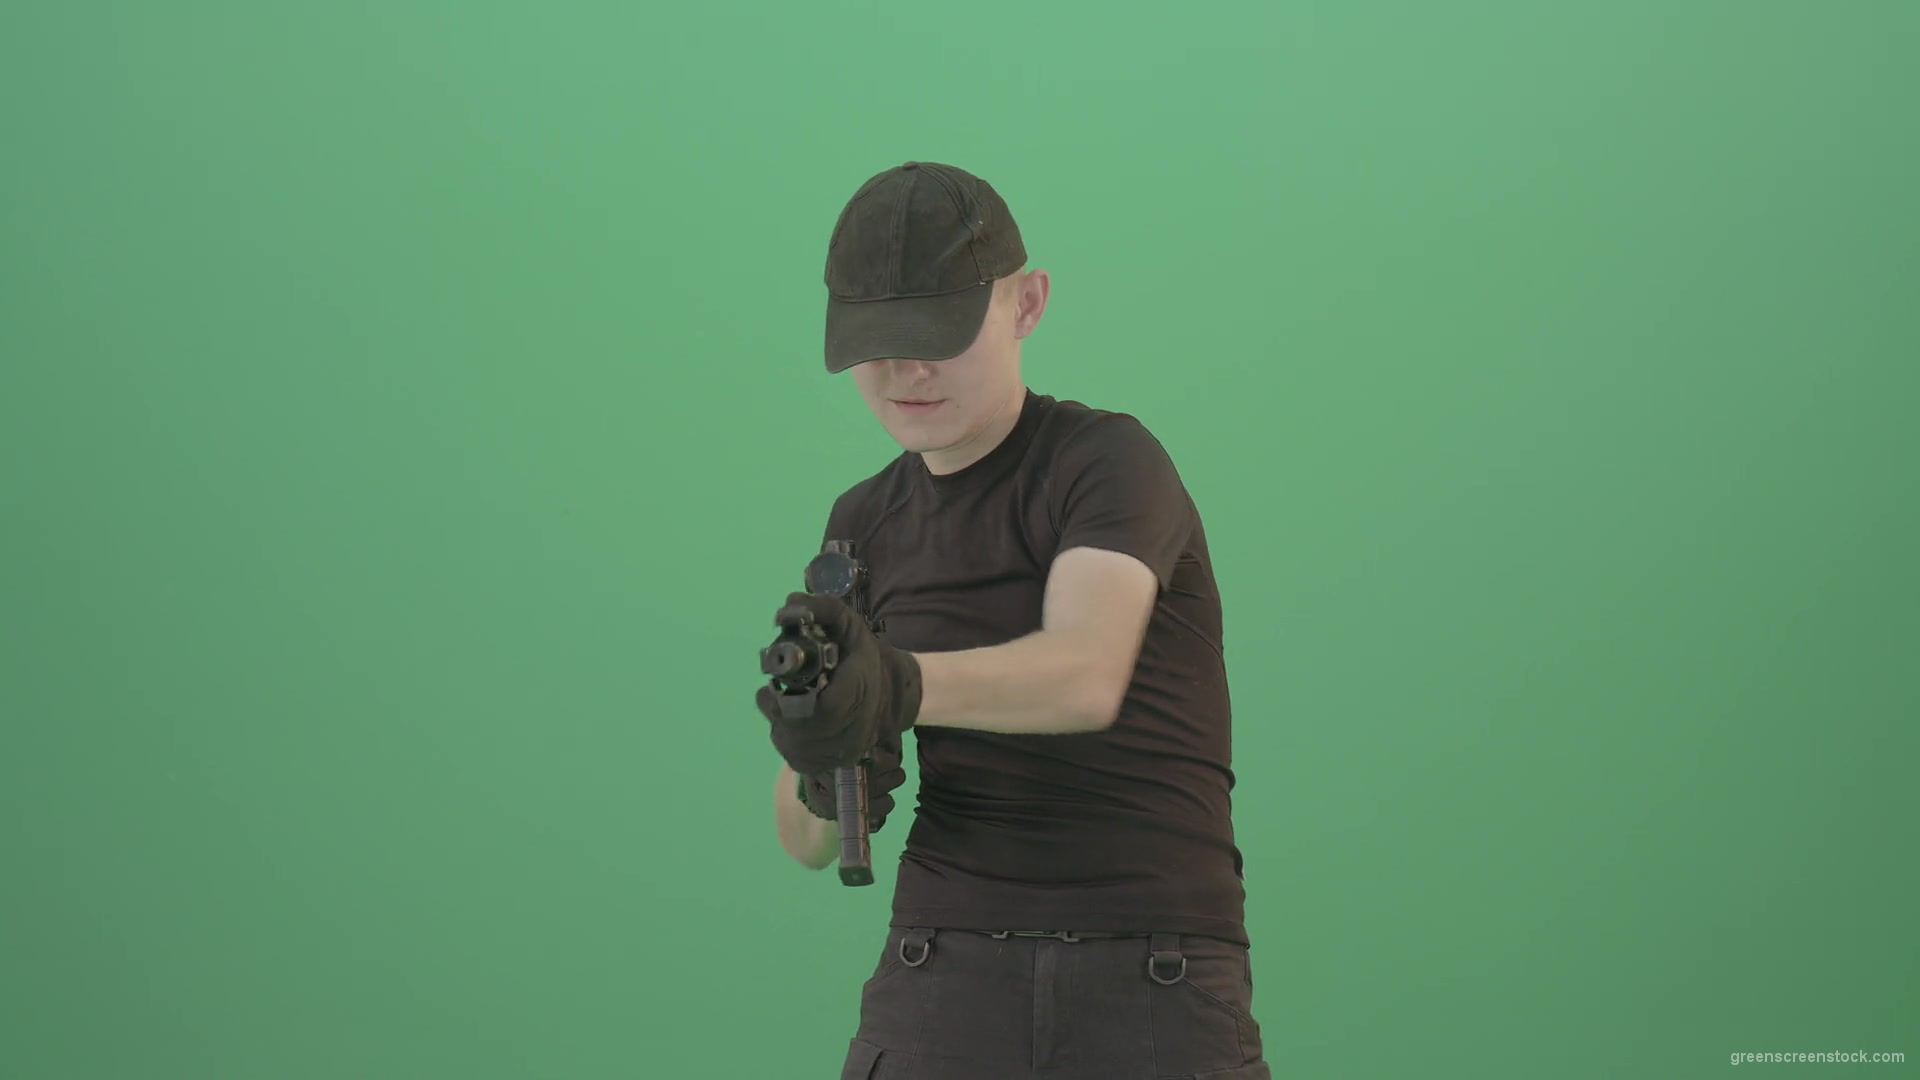 Funny-Small-boy-terrorist-shooting-enemies-from-machine-gun-isolated-on-green-screen-4K-Video-Footage-1920_006 Green Screen Stock